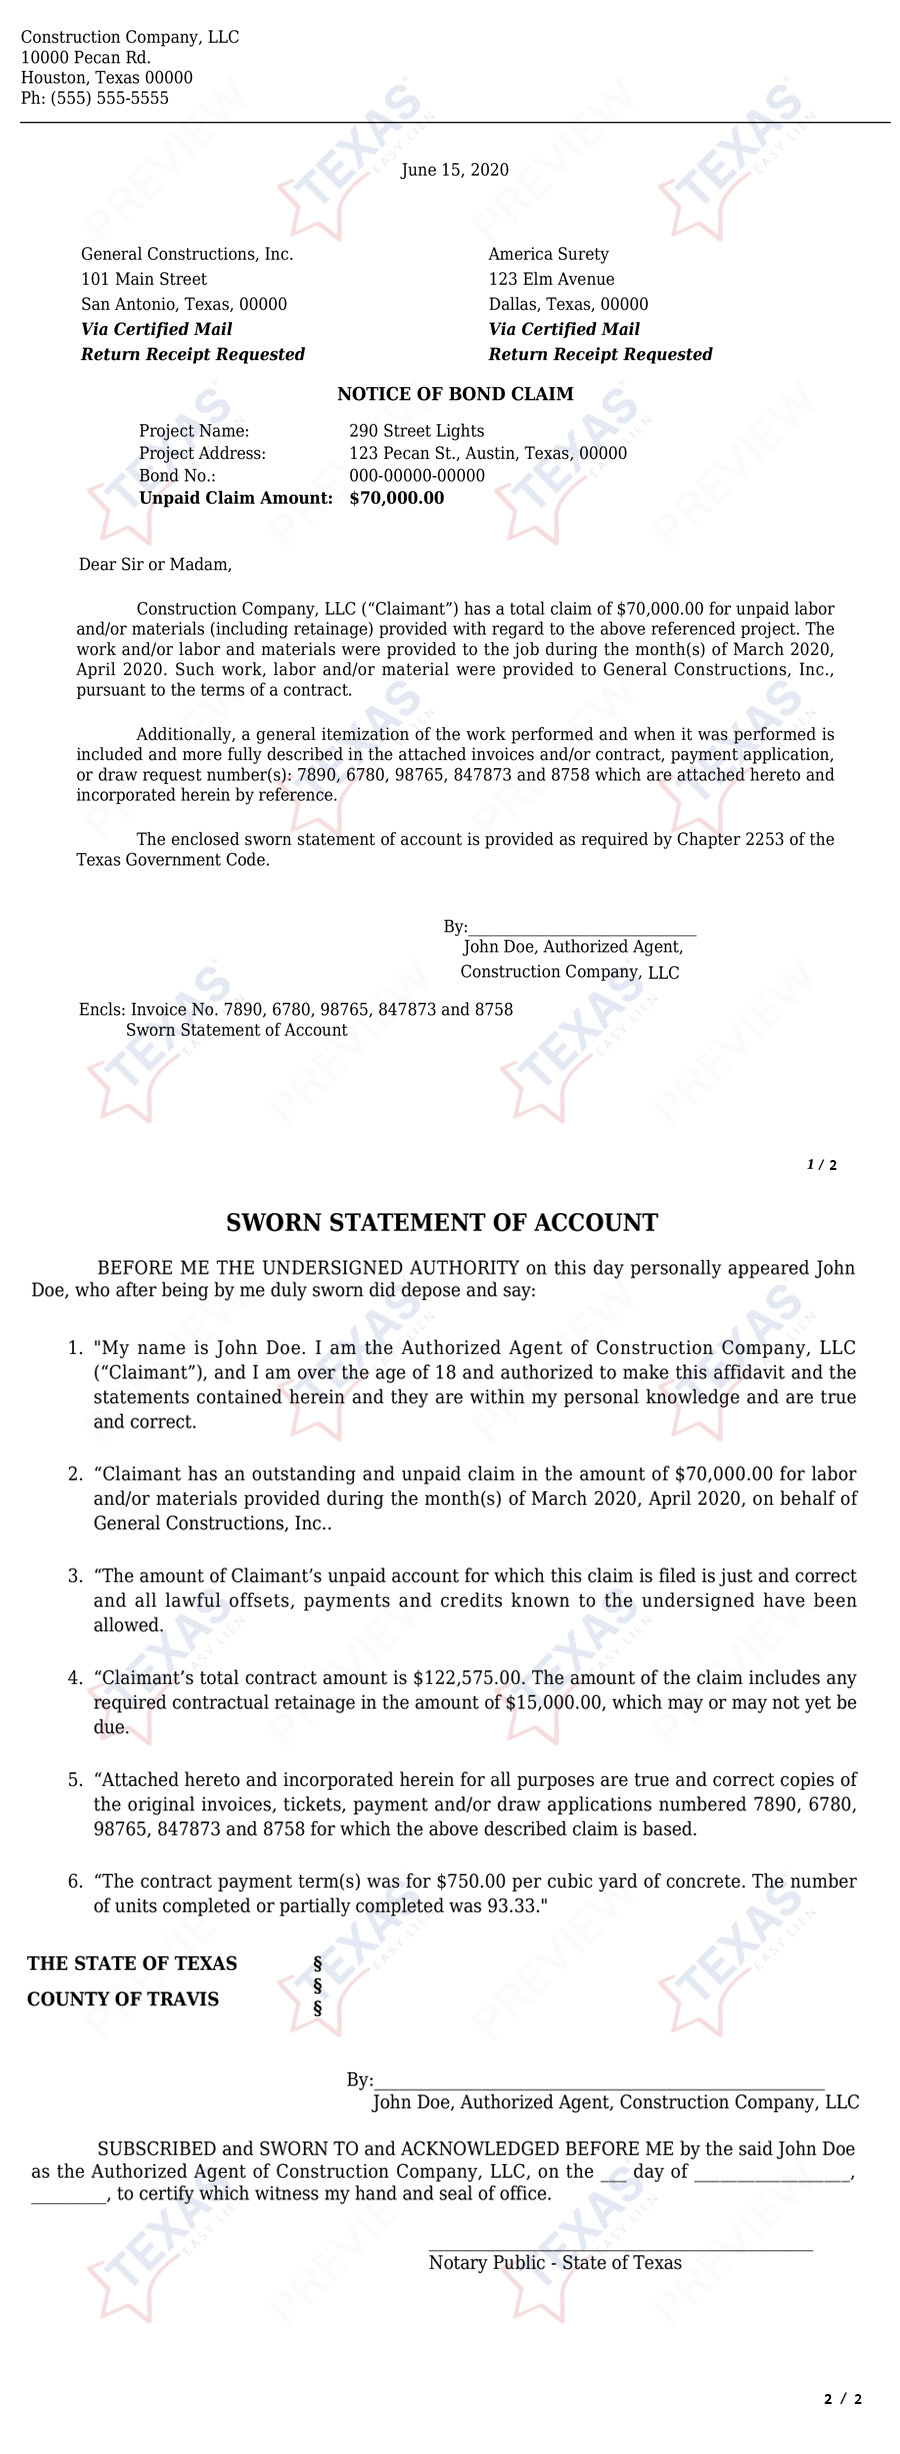 Online Professional Lien Services - Texas Easy Lien intended for Bond Claim Letter Template